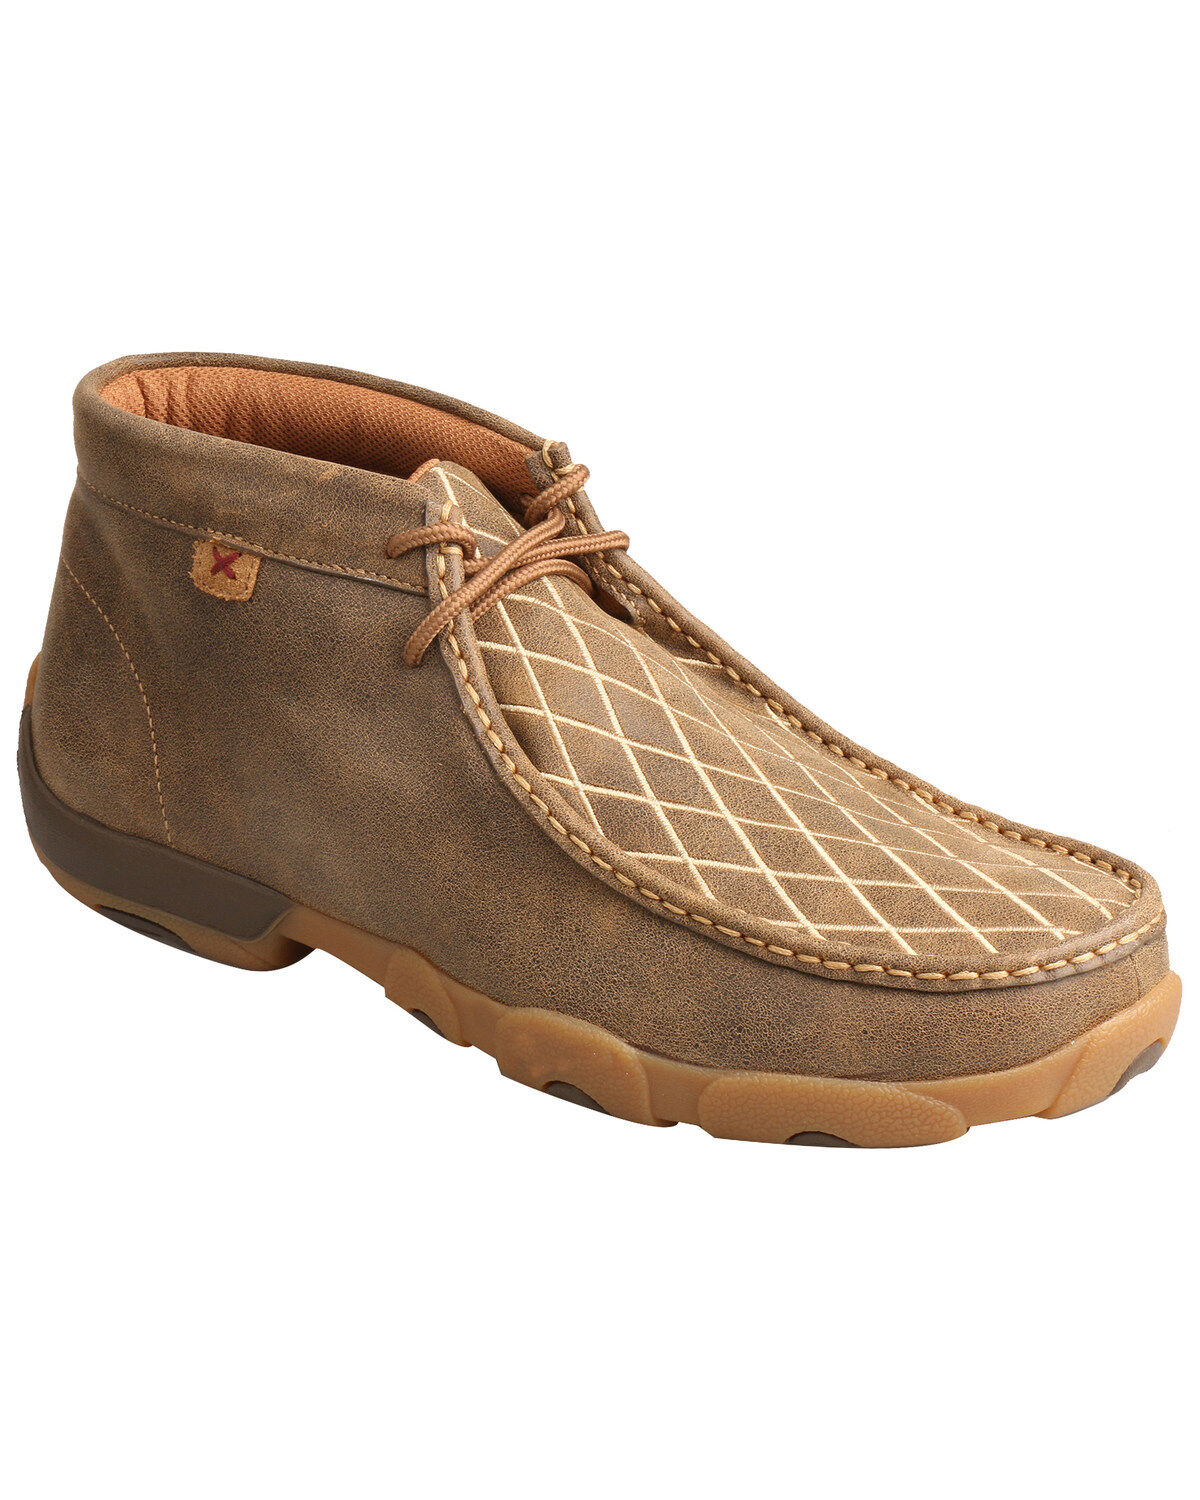 Men's Casual Western Boots - Boot Barn